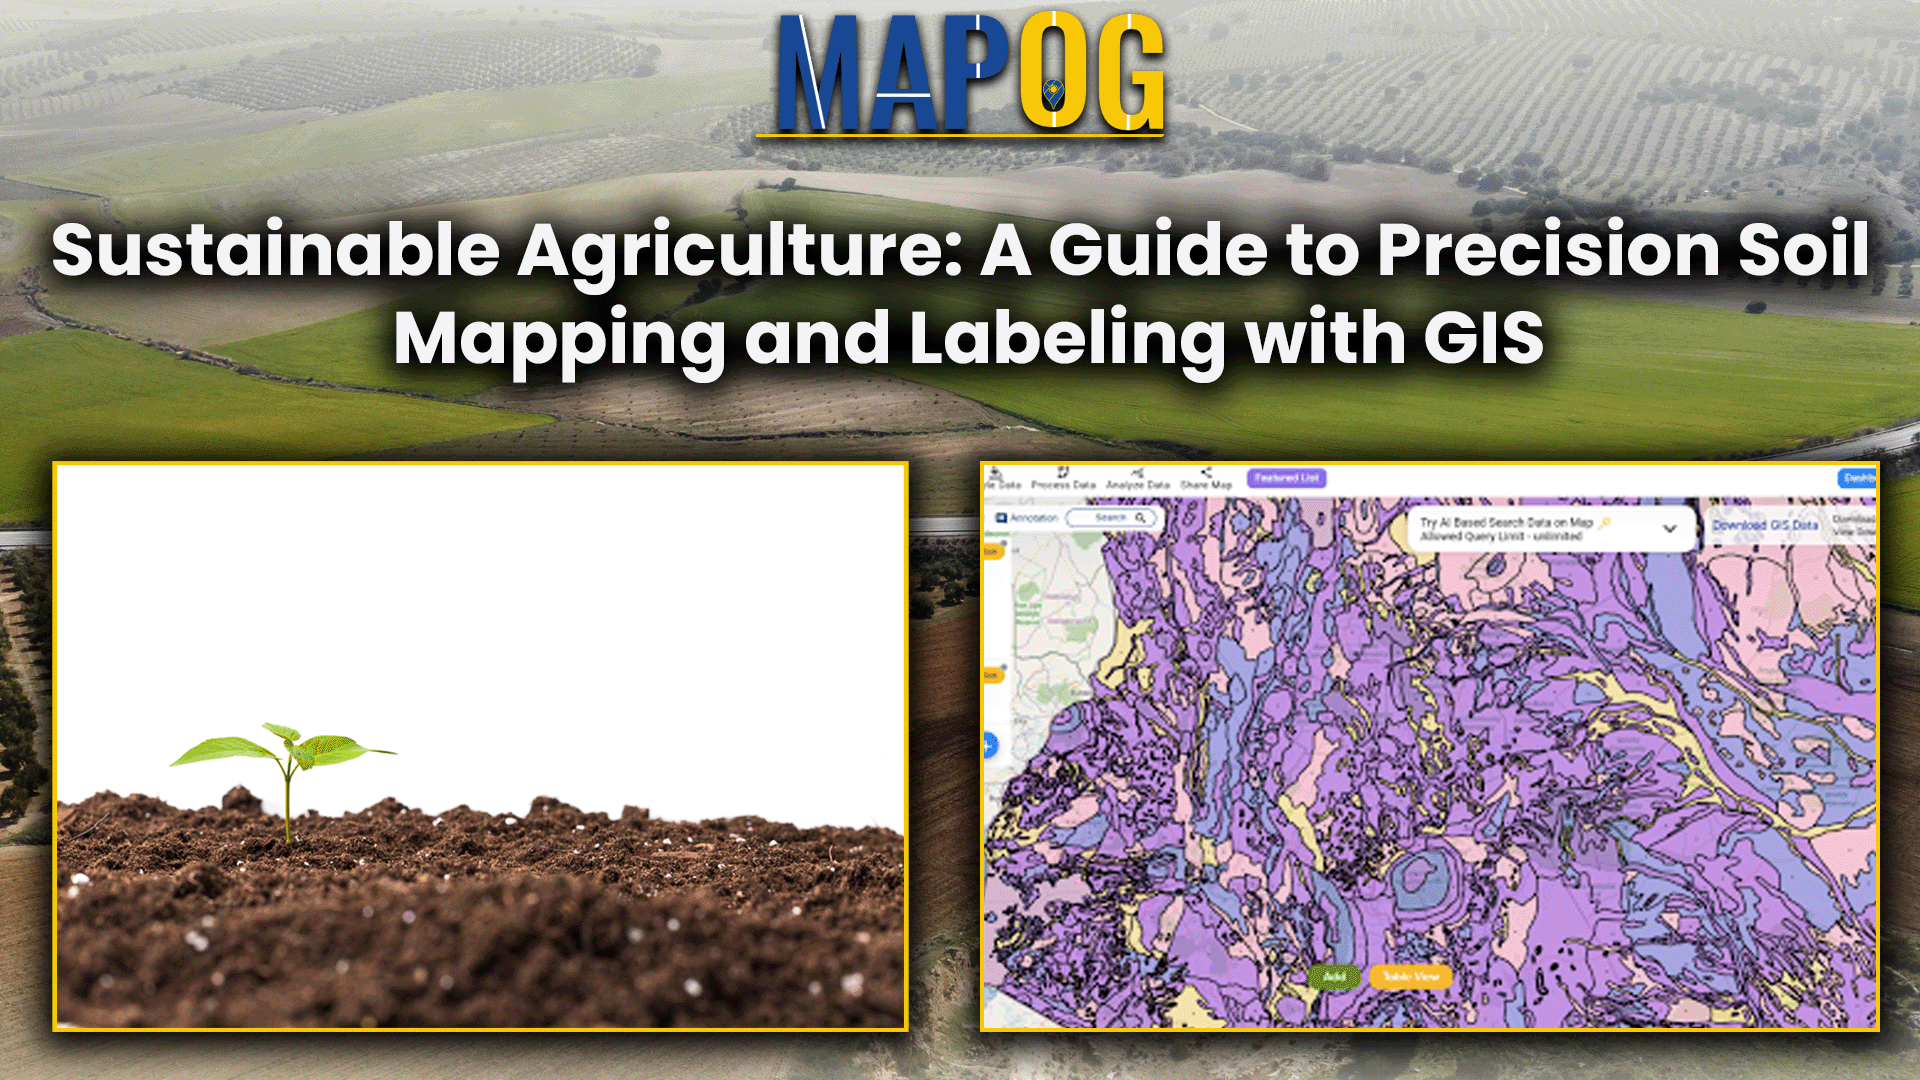 Empowering Sustainable Agriculture: A Guide to Precision Soil Mapping and Labeling with GIS